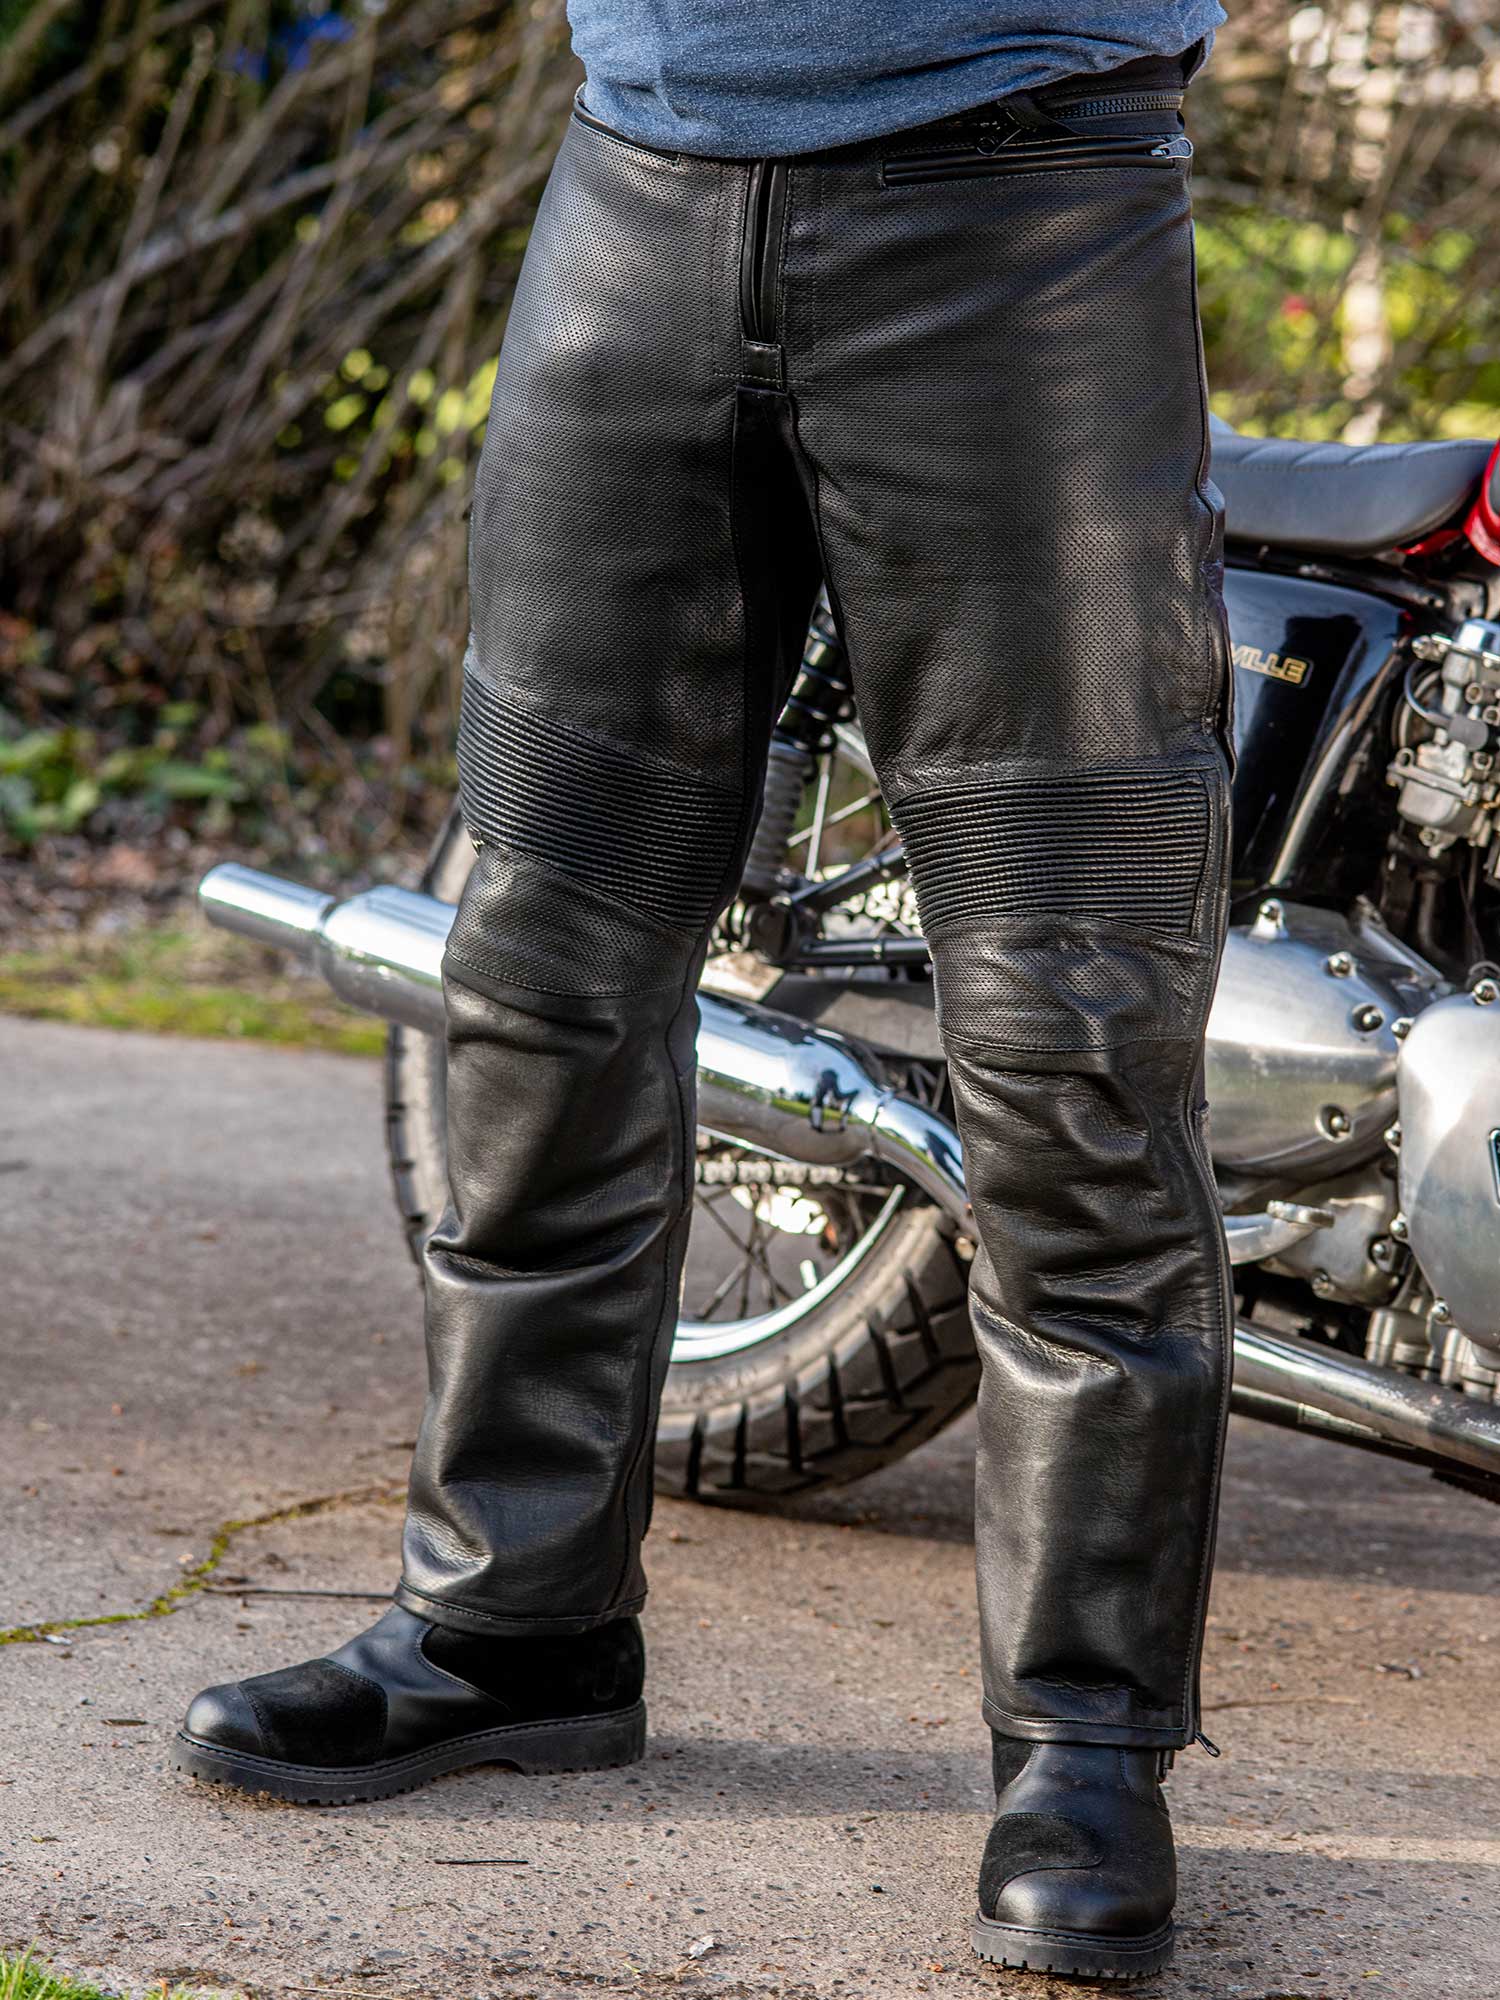 REV'IT!'s New Davis TF Riding Jeans Combine Safety And Fashion